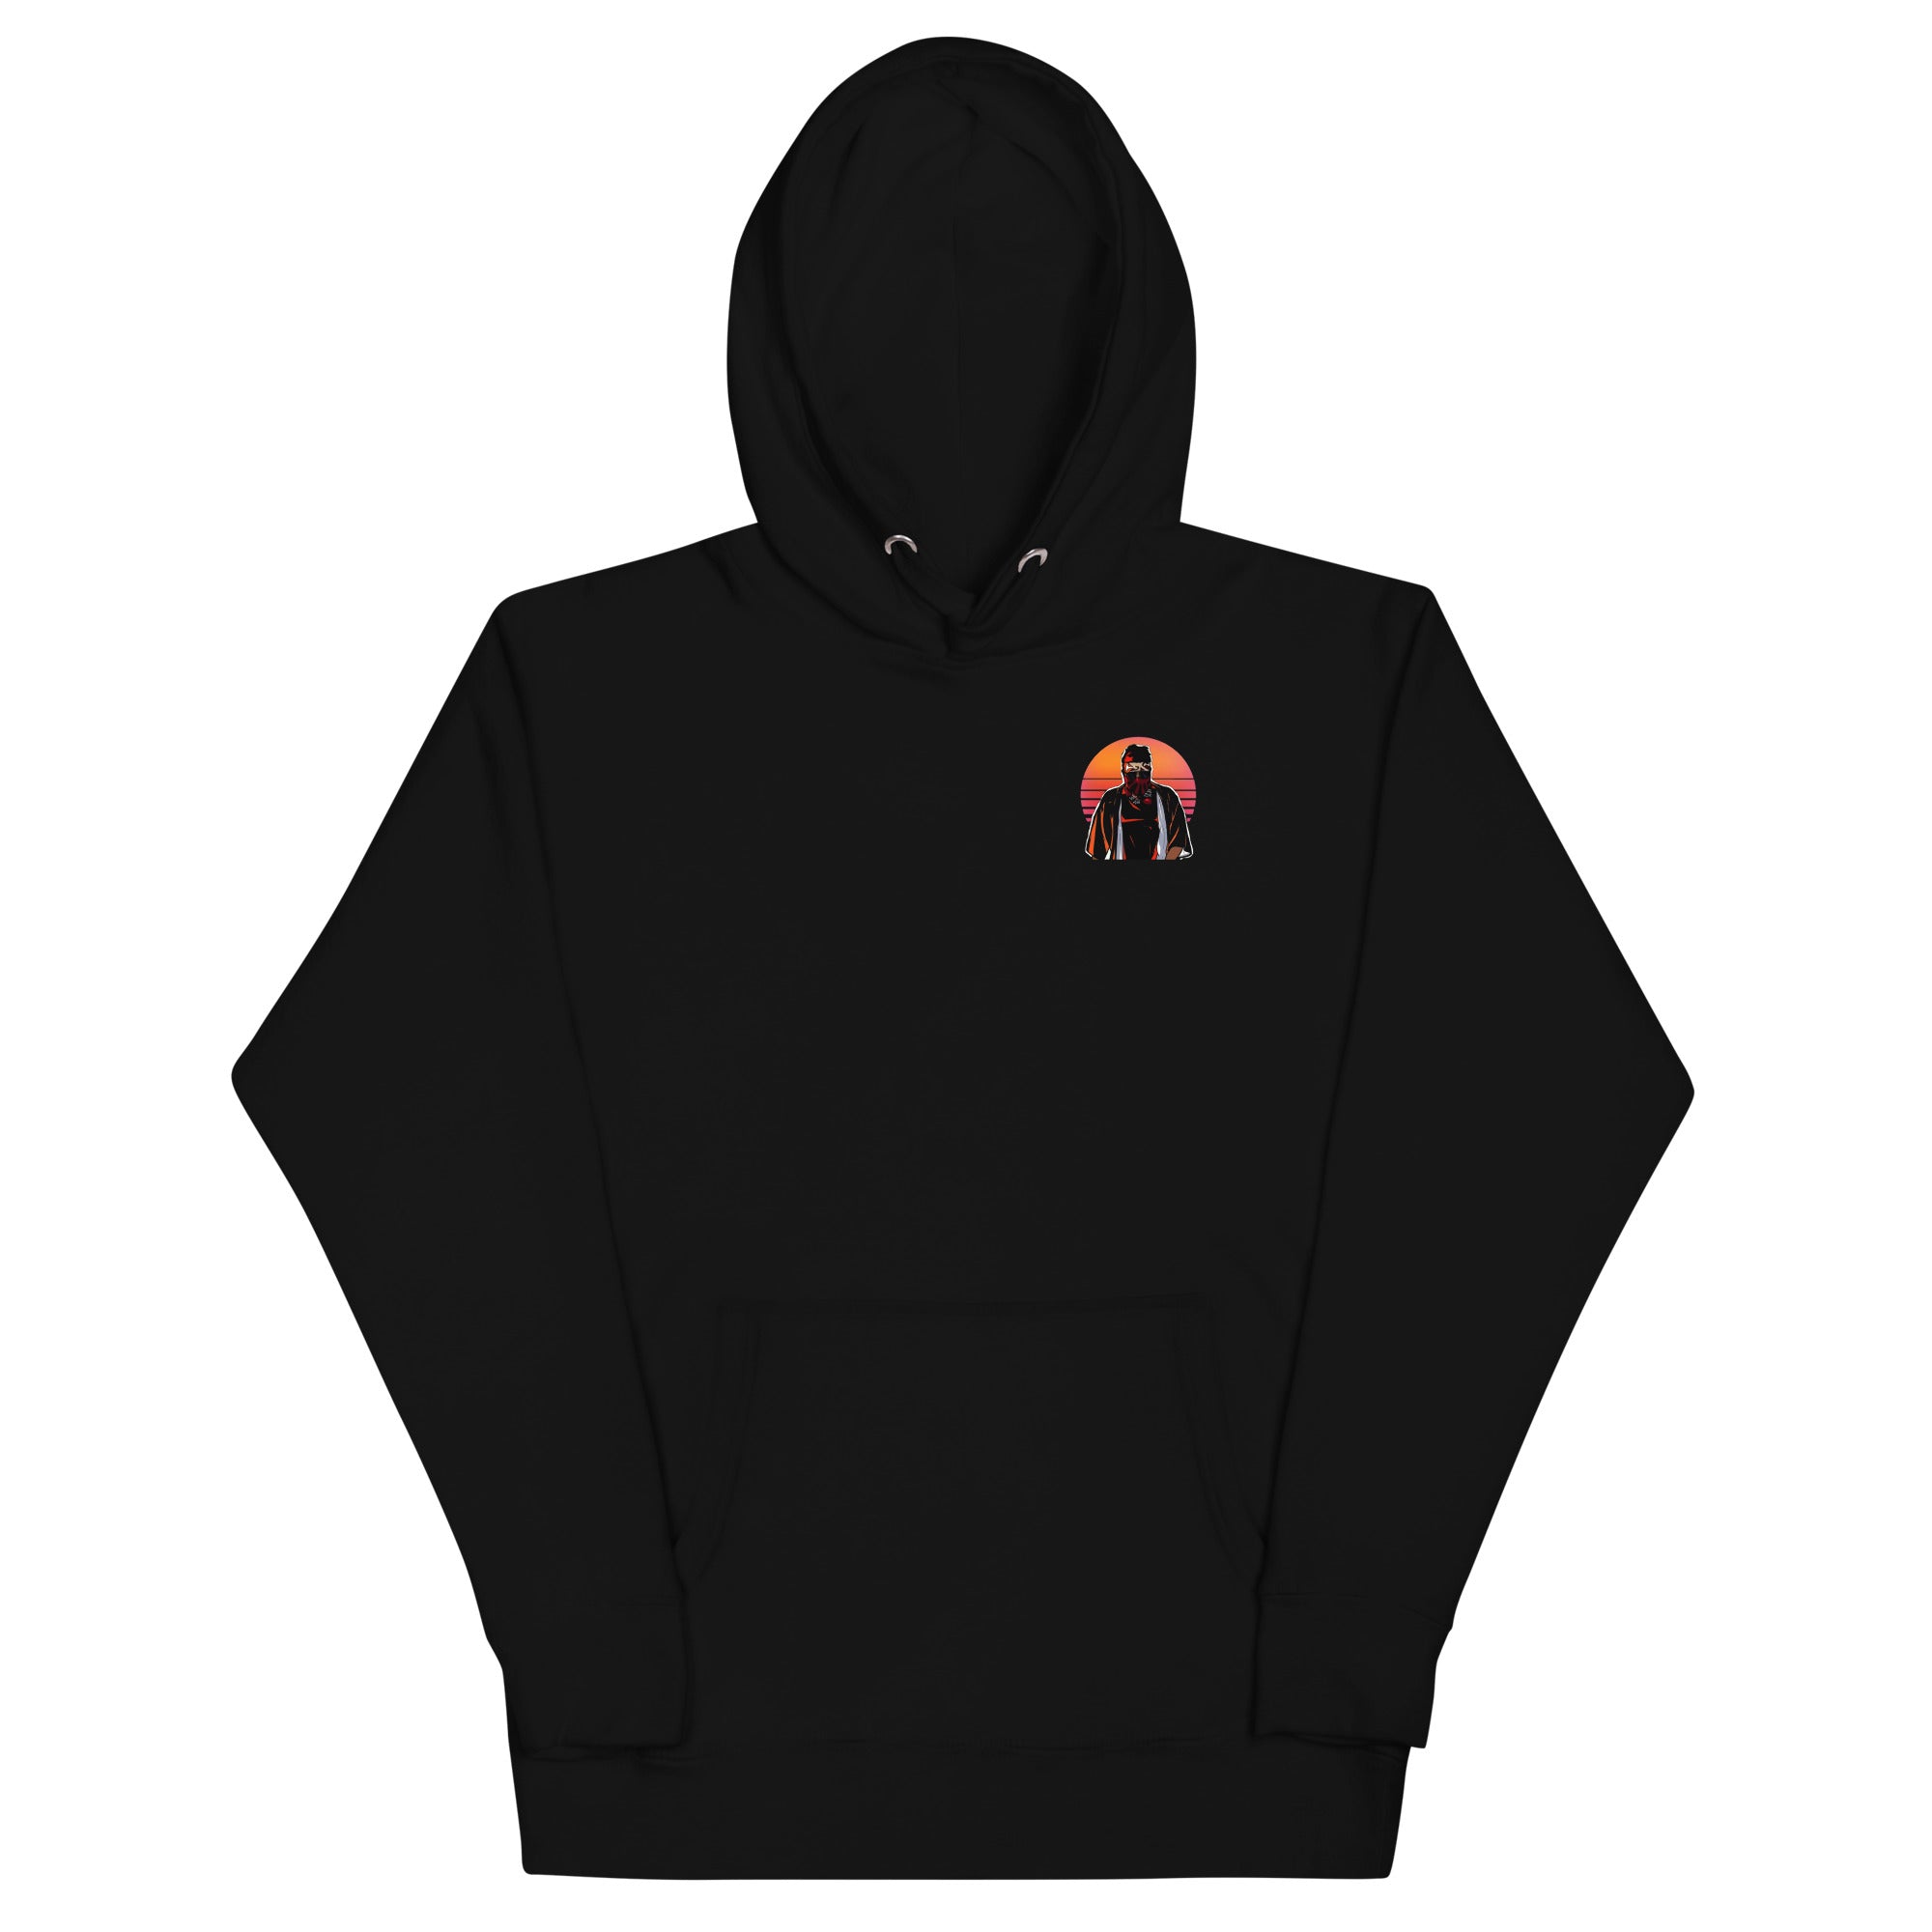 Show your support for house music with the DJ MAZADU UNISEX HOODIE. Featuring the DJ's logo, this hoodie is a must-have for any fan or house music lover. A comfortable and stylish addition to your wardrobe, wear this hoodie to any Rave or just to jam out to your favorite beats!